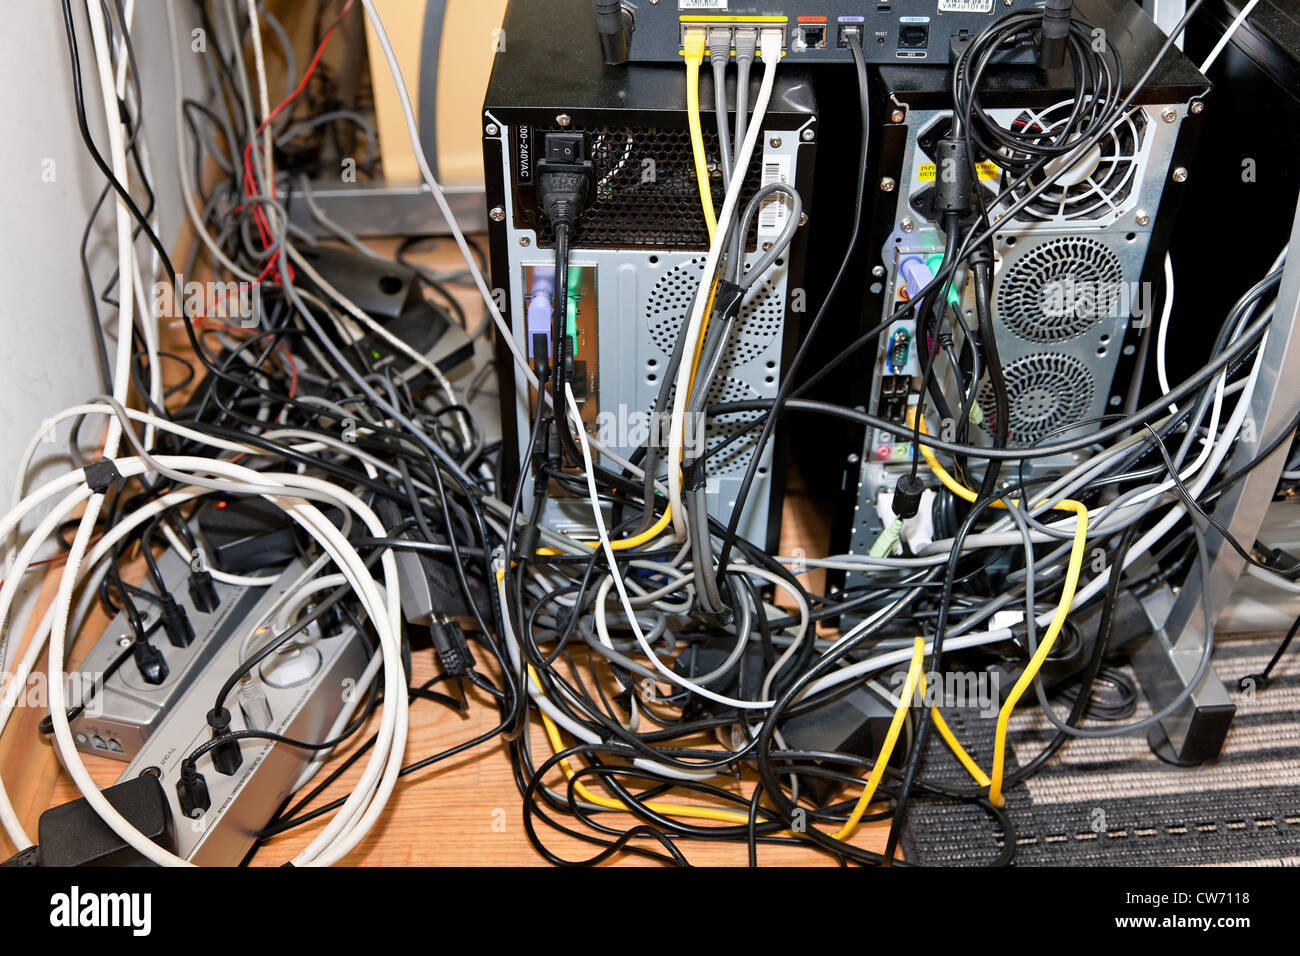 Cable clutter Stock Photo